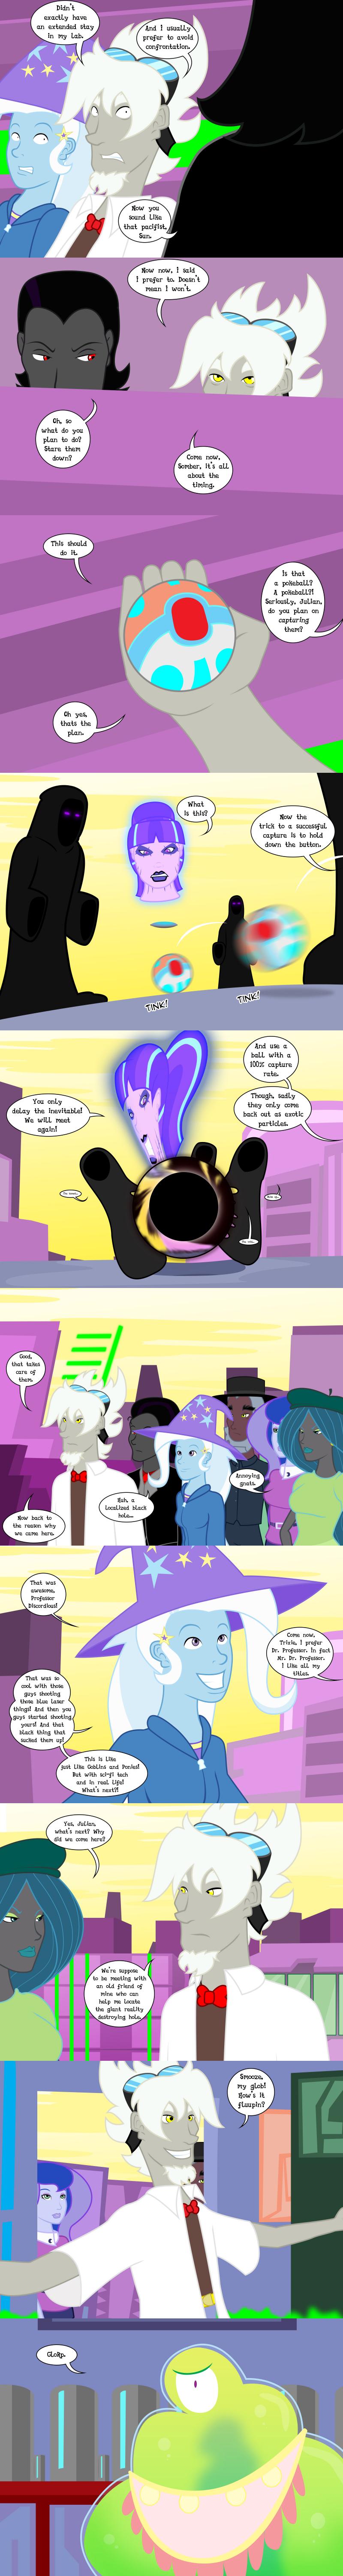 Page 24 - Part 5